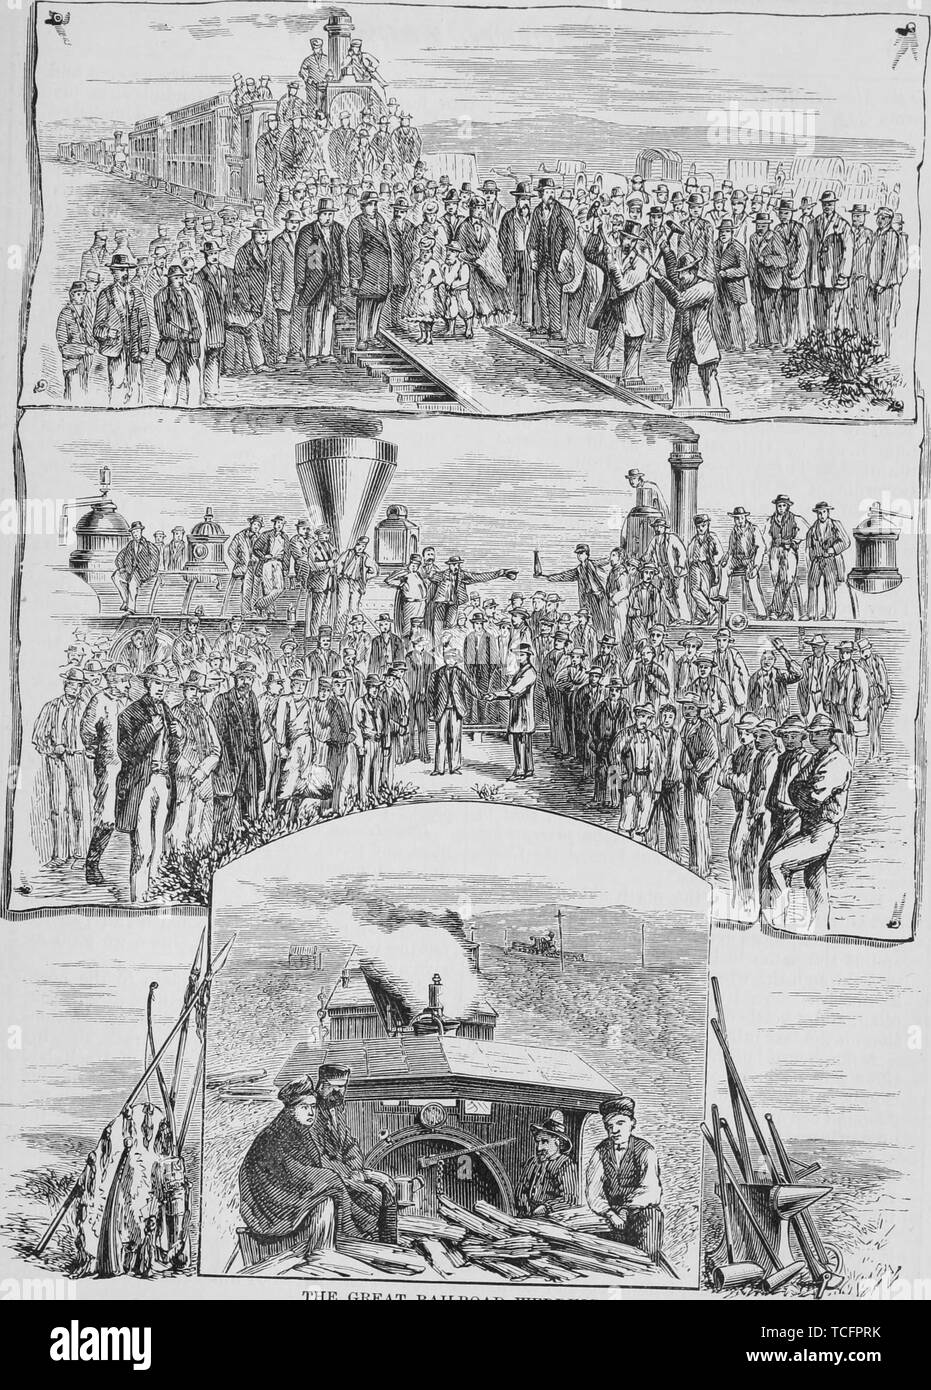 Engravings of the great railroad wedding, driving the last Spike, union of the East and West, and first whistle of the Iron Horse, from the book 'The Pacific tourist' by Henry T. Williams, 1878. Courtesy Internet Archive. () Stock Photo